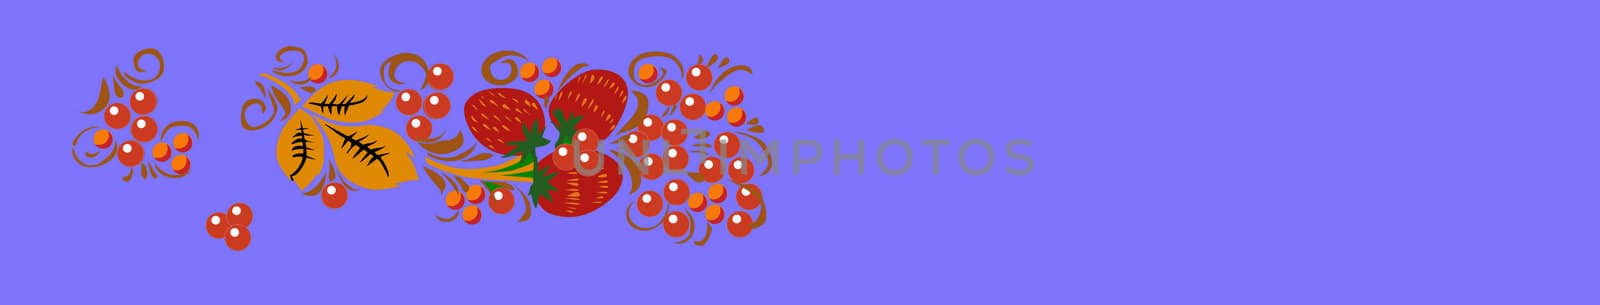 vector drawing of the decorative berries of the strawberries on blue background